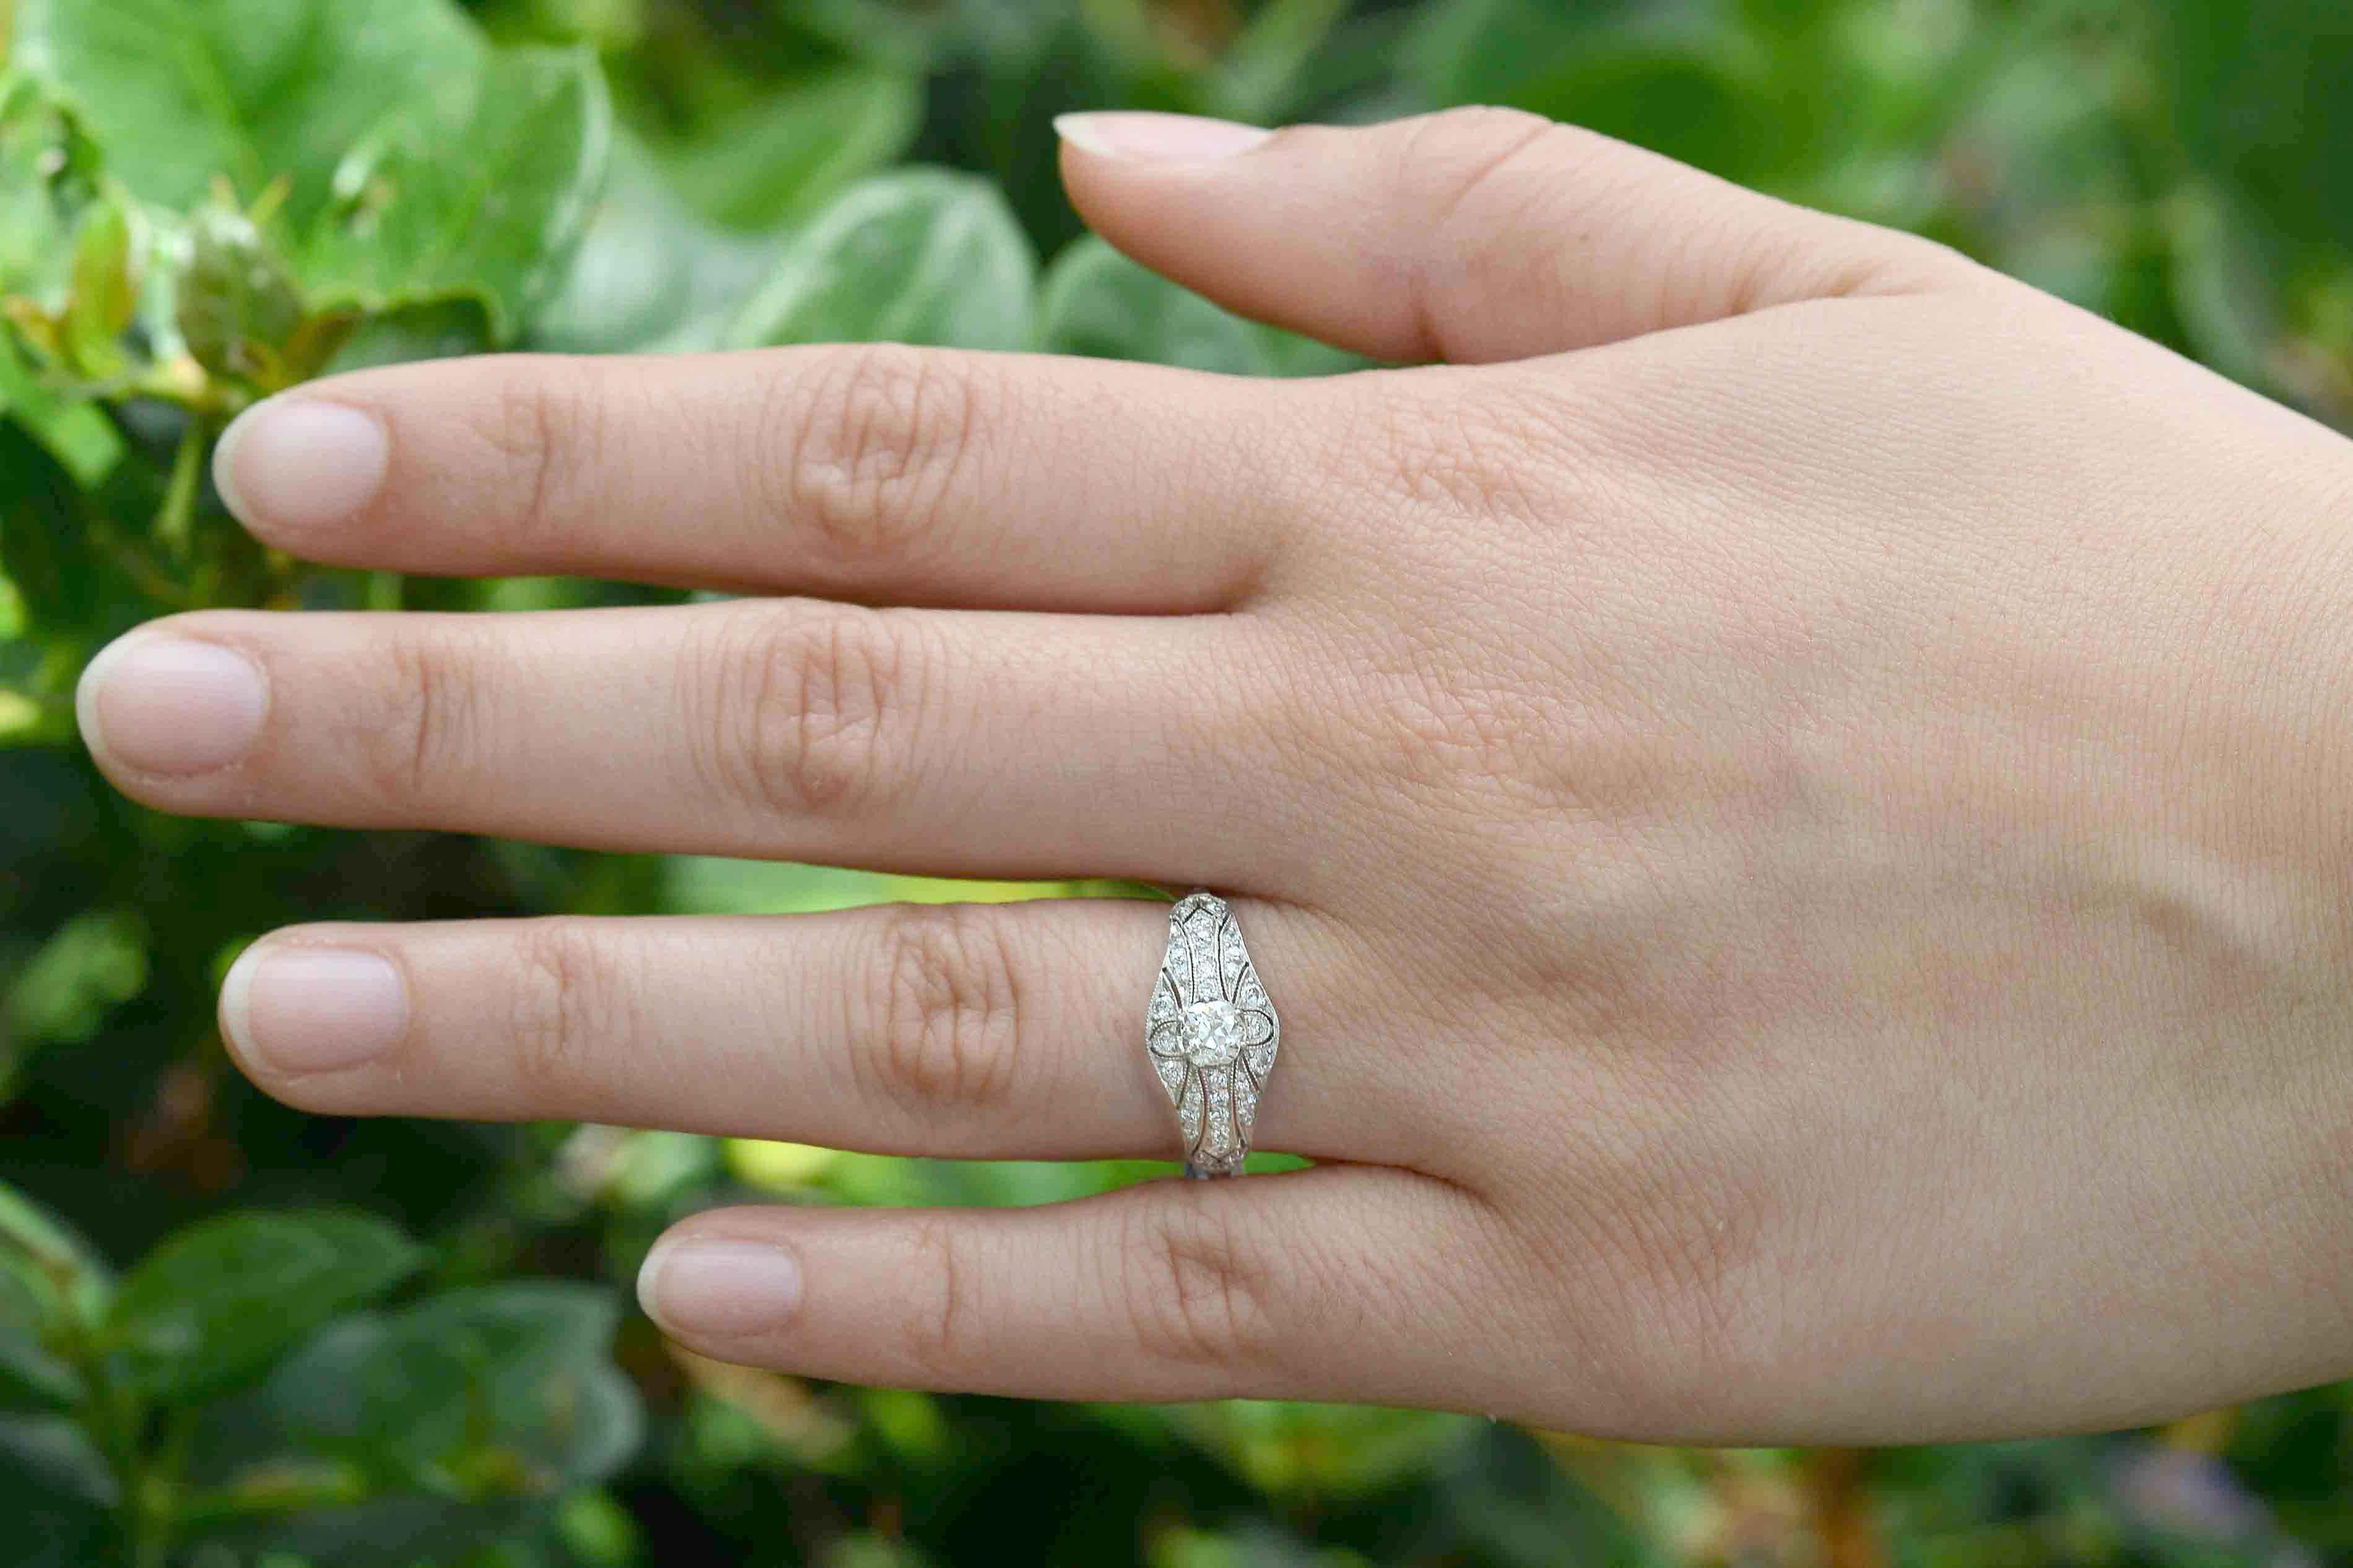 The elegance, romance and beauty of the Edwardian era shows through in this heirloom engagement ring. Meticulously crafted of platinum in a low setting and embellished with a sparkling, chunky old mine cut diamond supported by a lacy, filigree